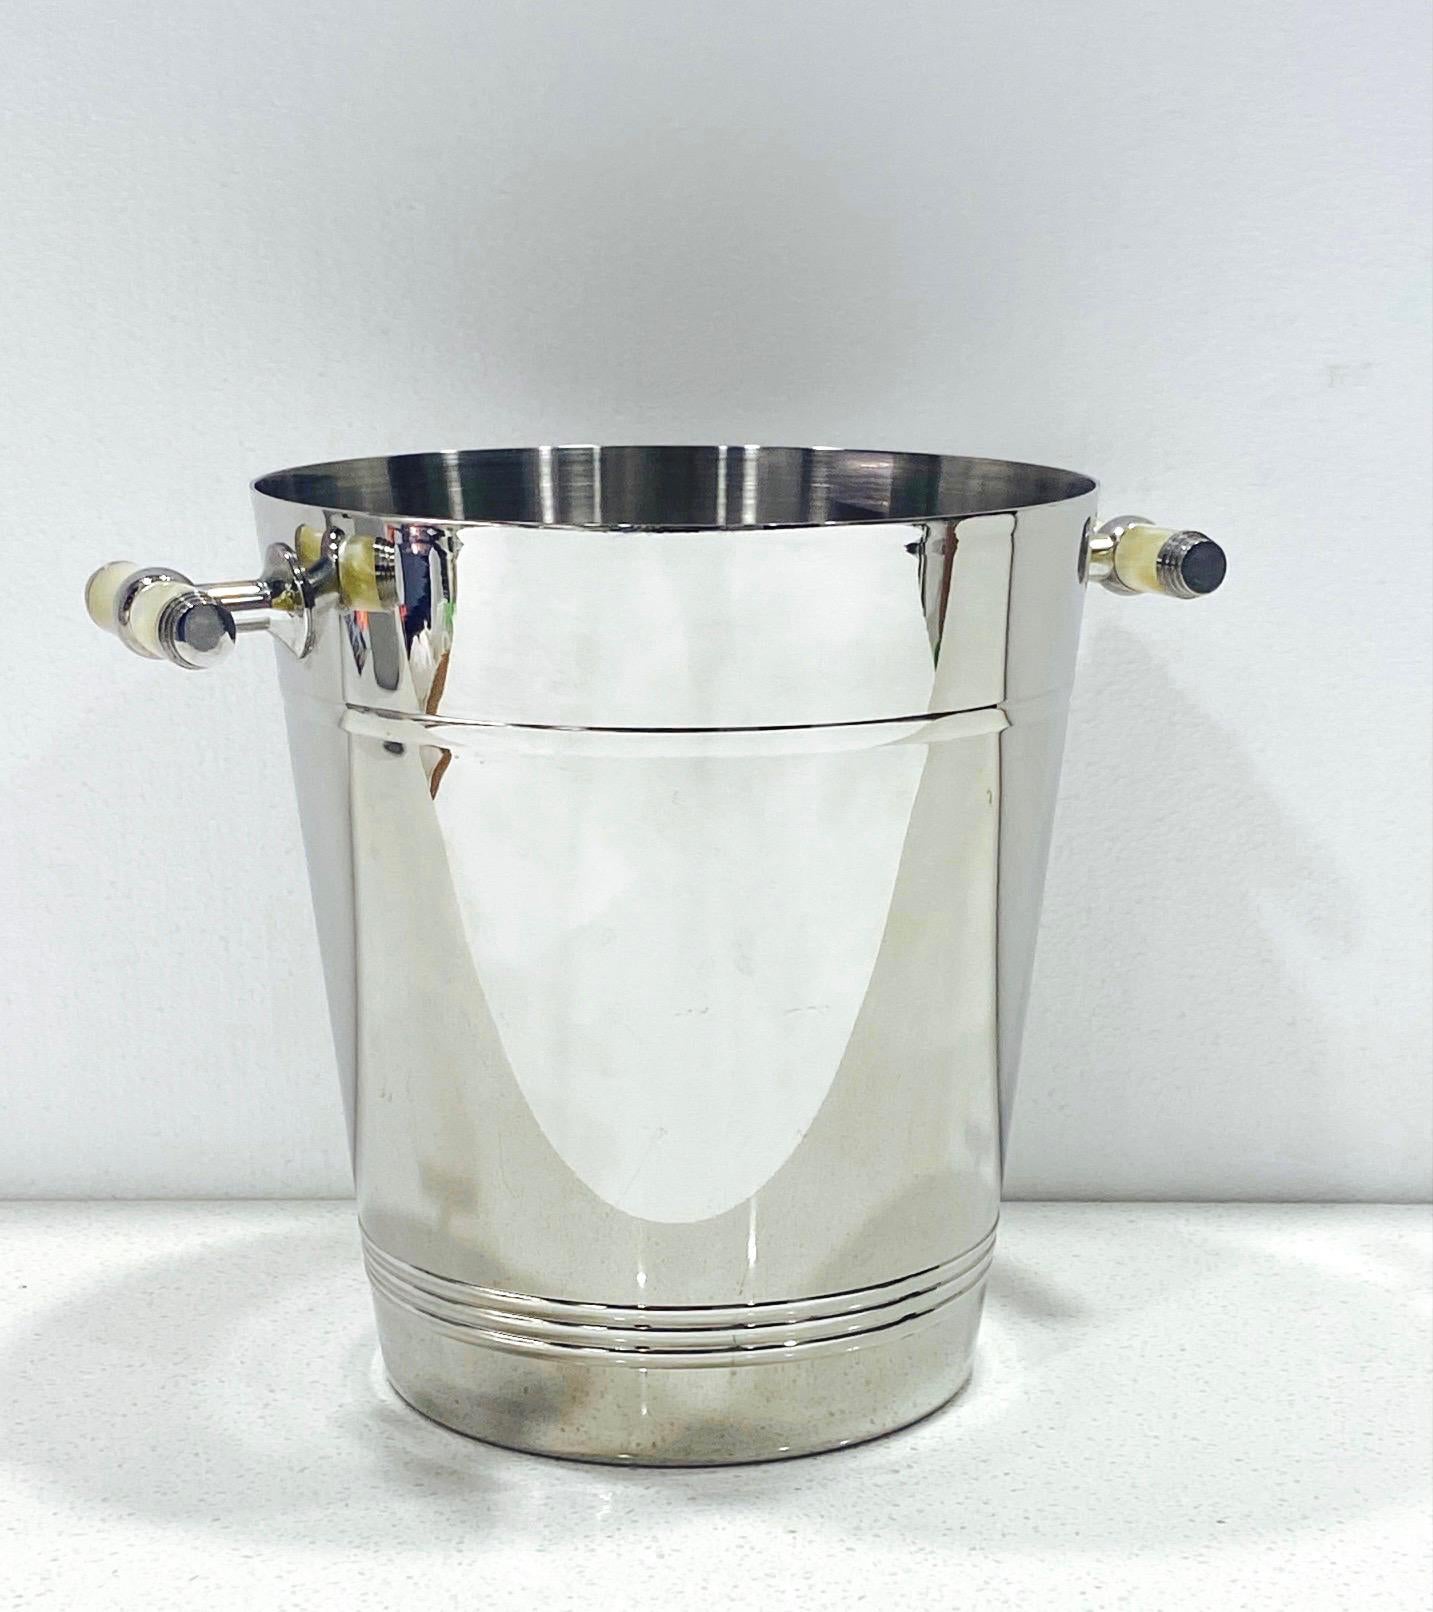 Vintage Art Deco style handmade stainless steel wine cooler, circa 2000. Can be used to chill bottles of wine, champagne, or as a large ice bucket. The cooler has a polished exterior with a nickel finish and features stylized handles in pearlescent